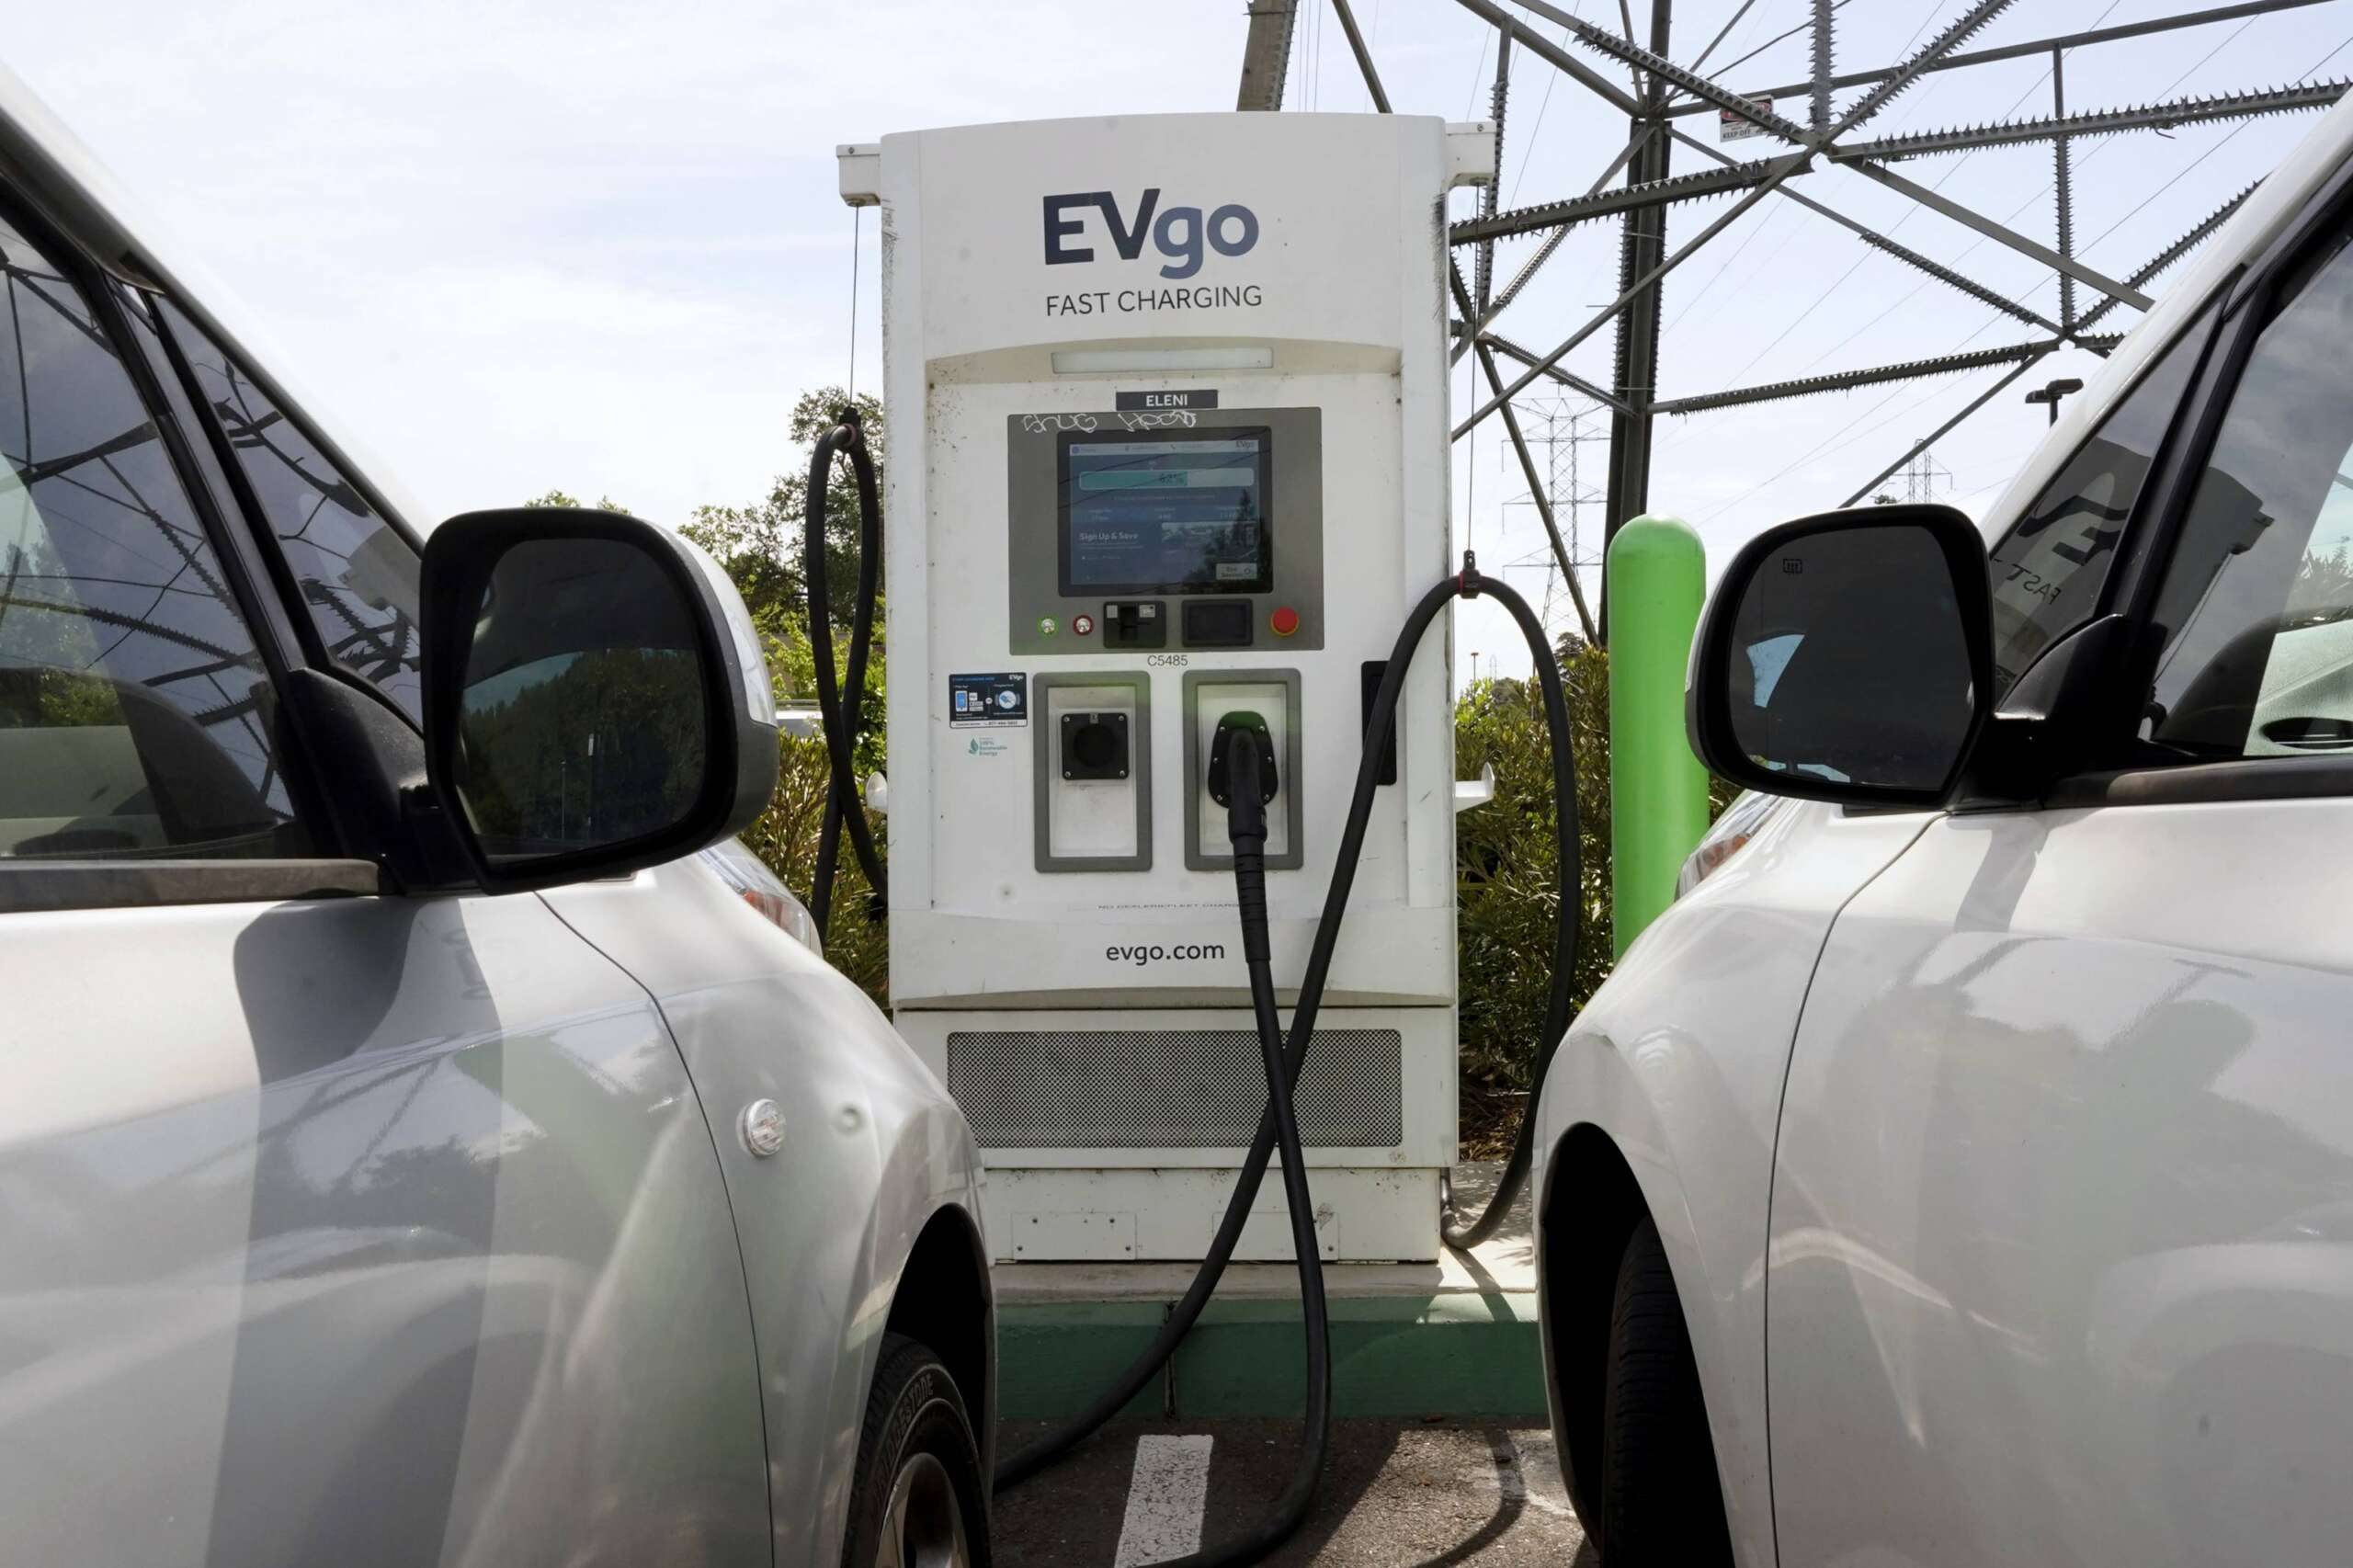 Electric Vehicle Suitability Assessment - EVSA